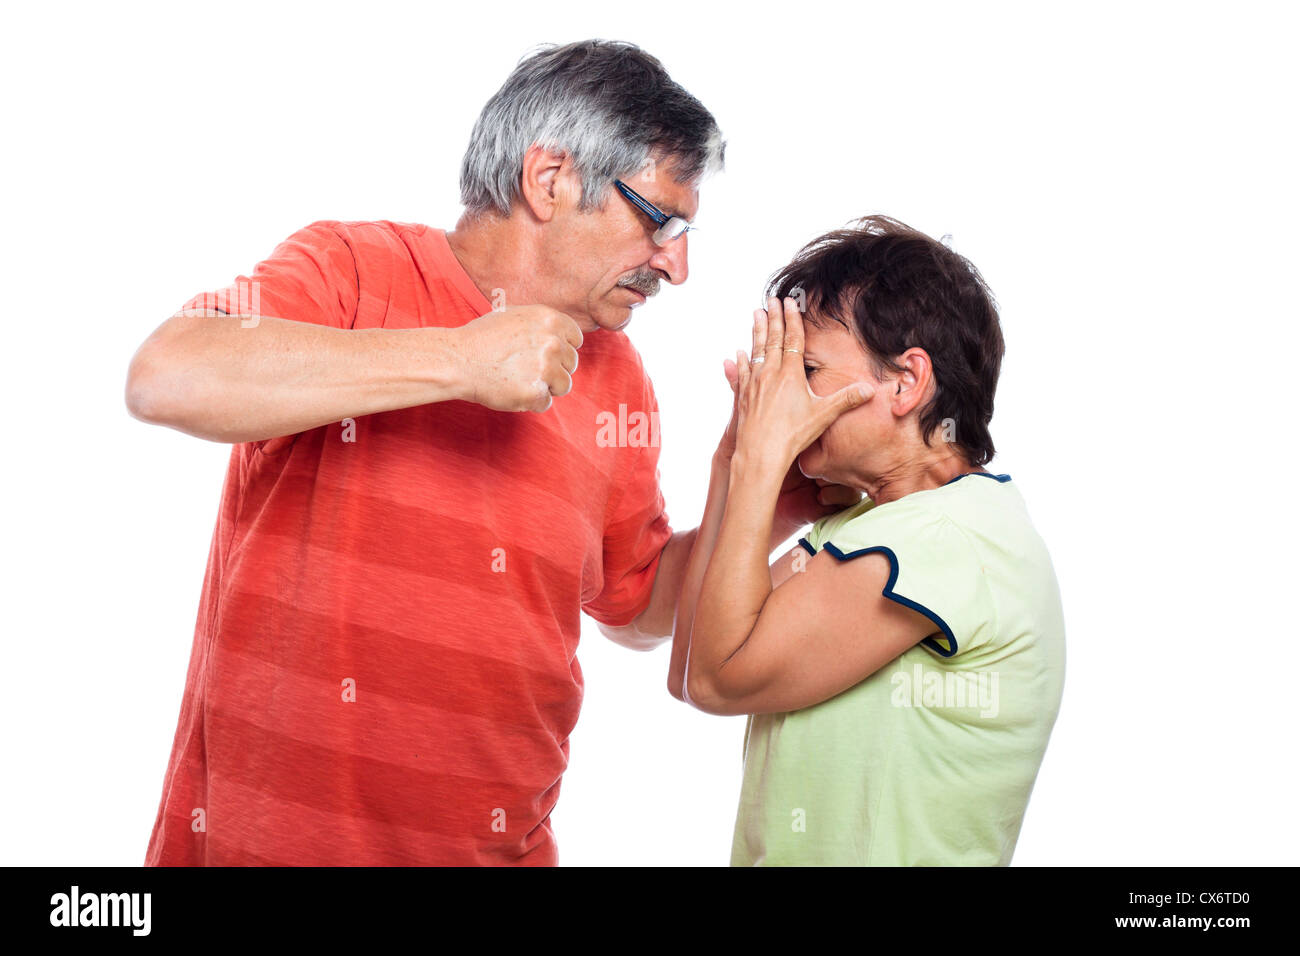 Domestic violence abuse concept, aggressive man going to punch unhappy woman, isolated on white background. Stock Photo